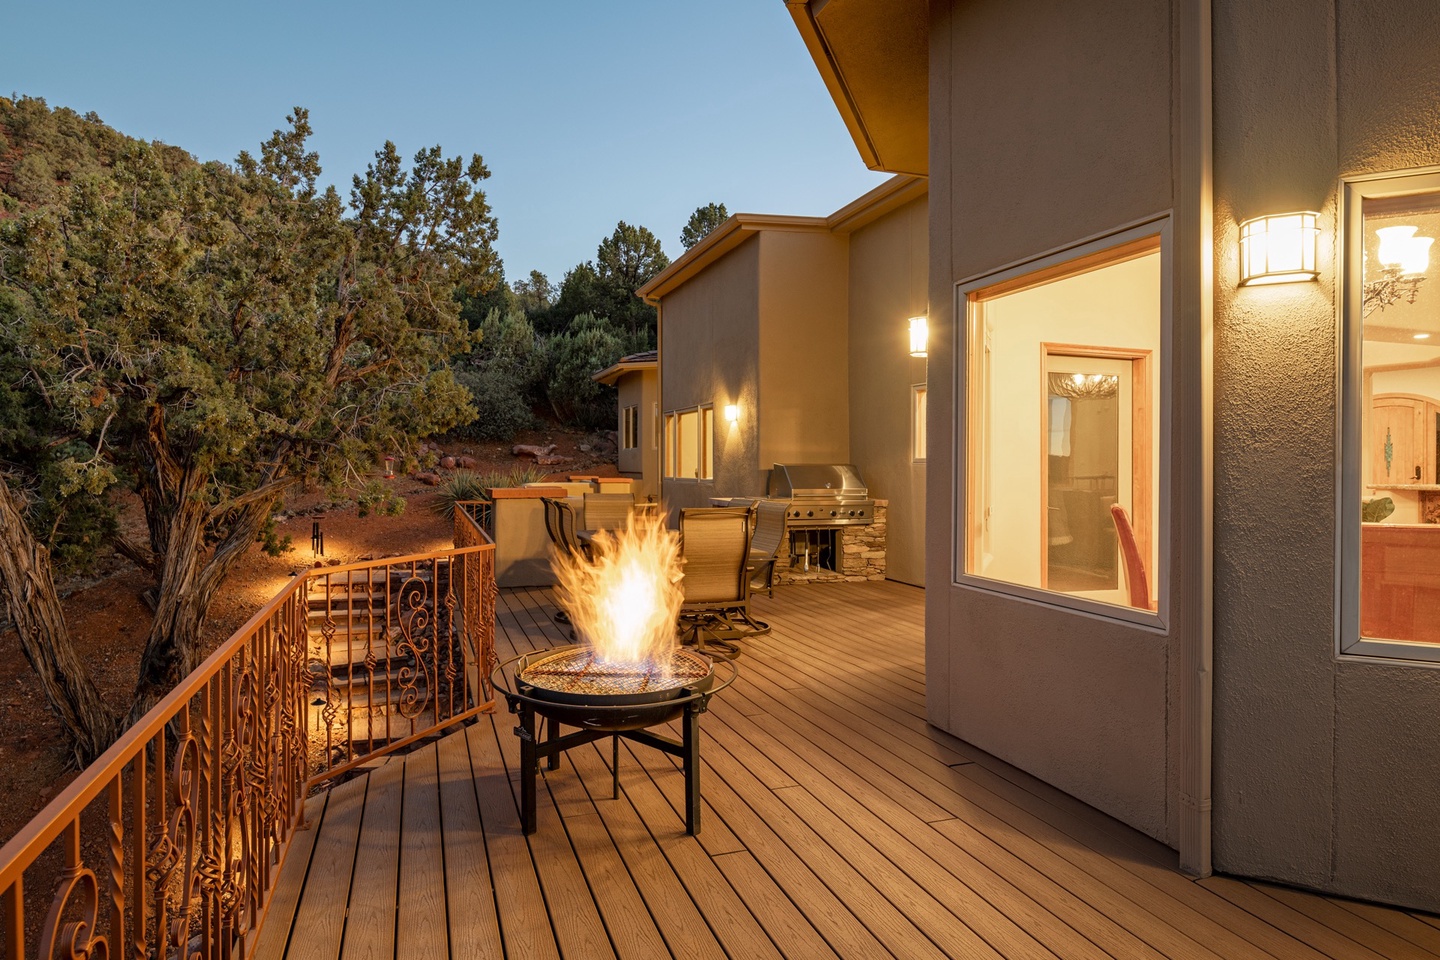 Spacious deck with upper level fire-pit